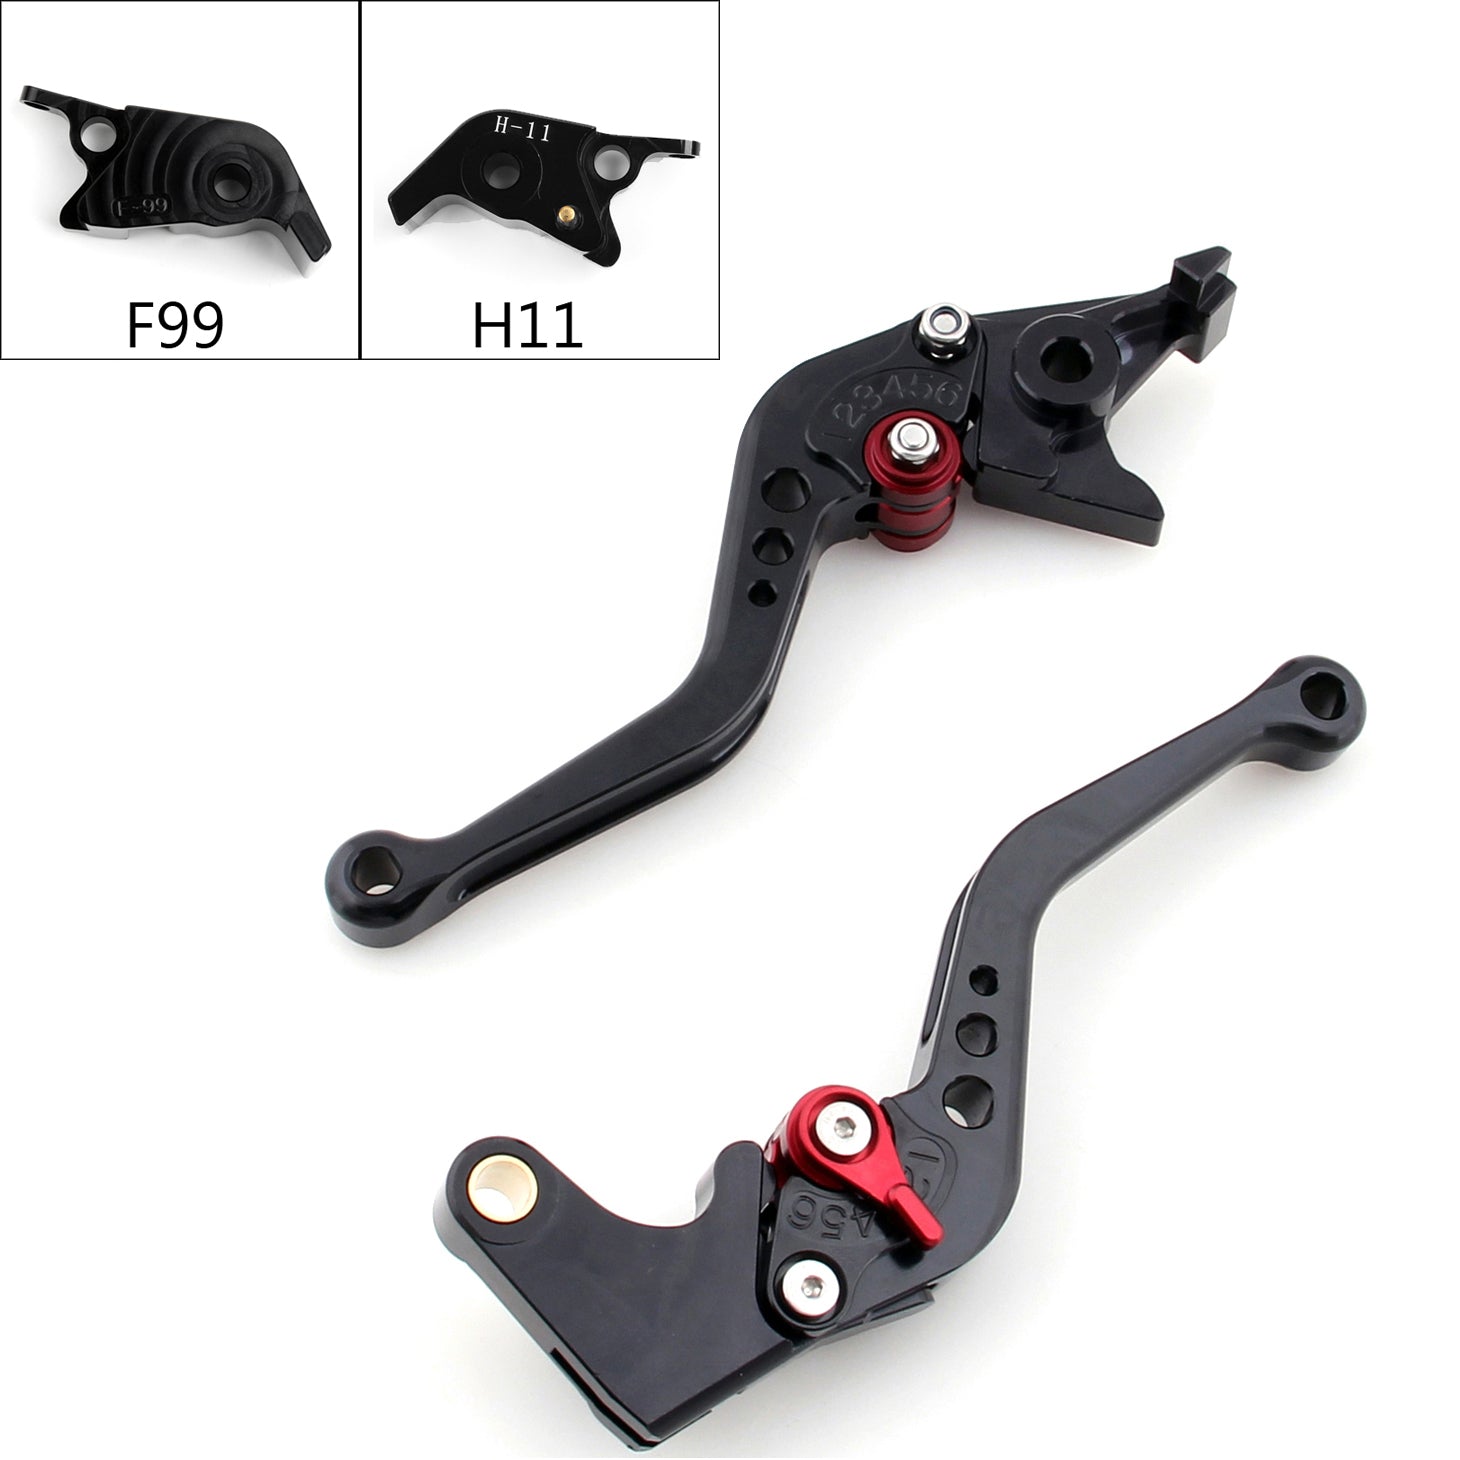 Short Brake Clutch Levers For Ducati 1299/1199/959/899 Panigale Xdiavel 749